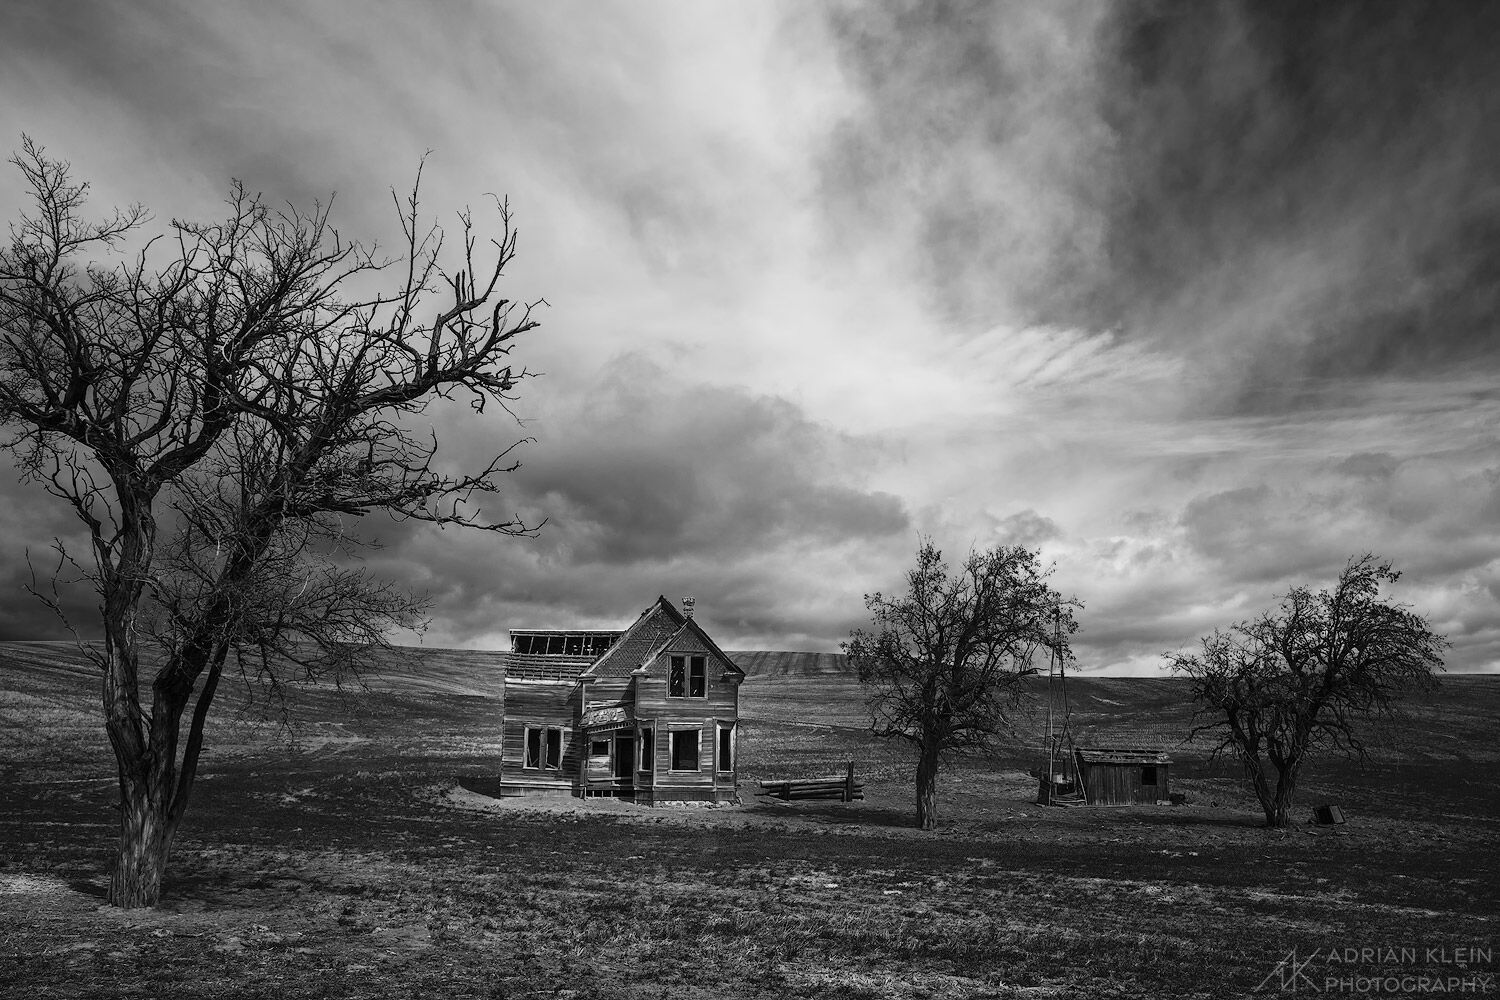 Old farm home near The Dalles Oregon. It certainly has not been lived in for many years yet feels far from dead still standing...